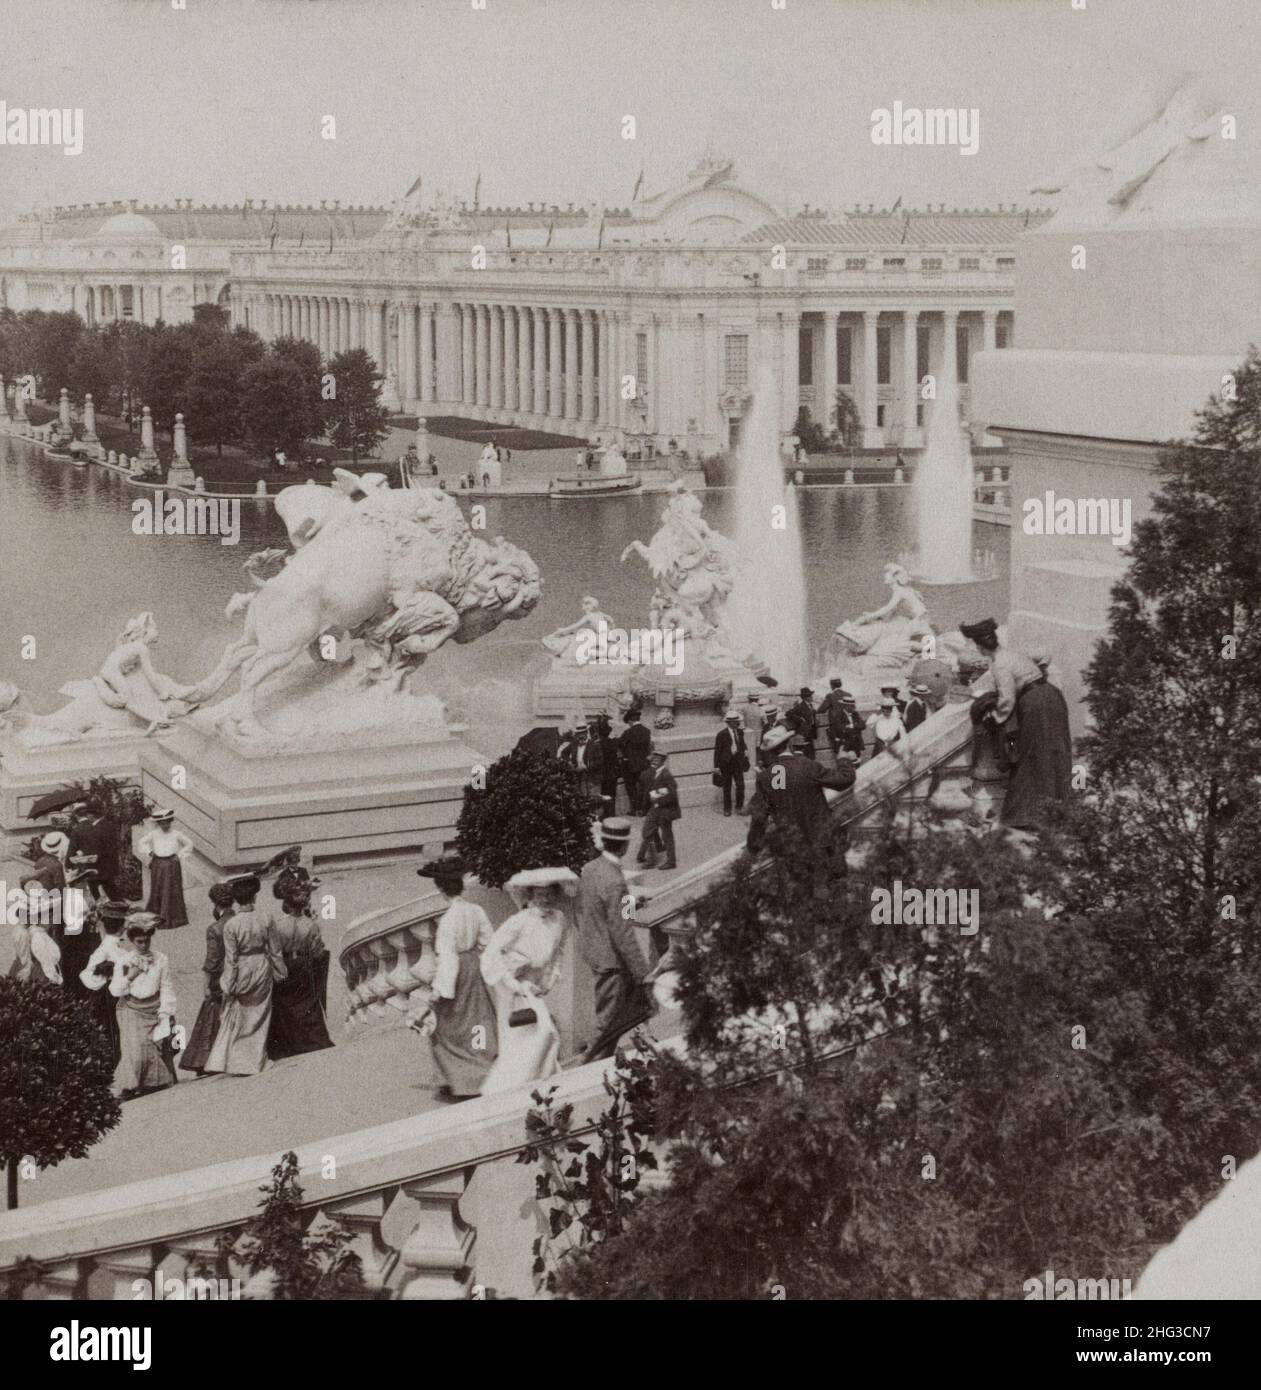 Vintage photo of Palace of Education, N E., over fountain and heroic statues, from Festival Hall, Exposition, St. Louis, USA. 1904 Stock Photo